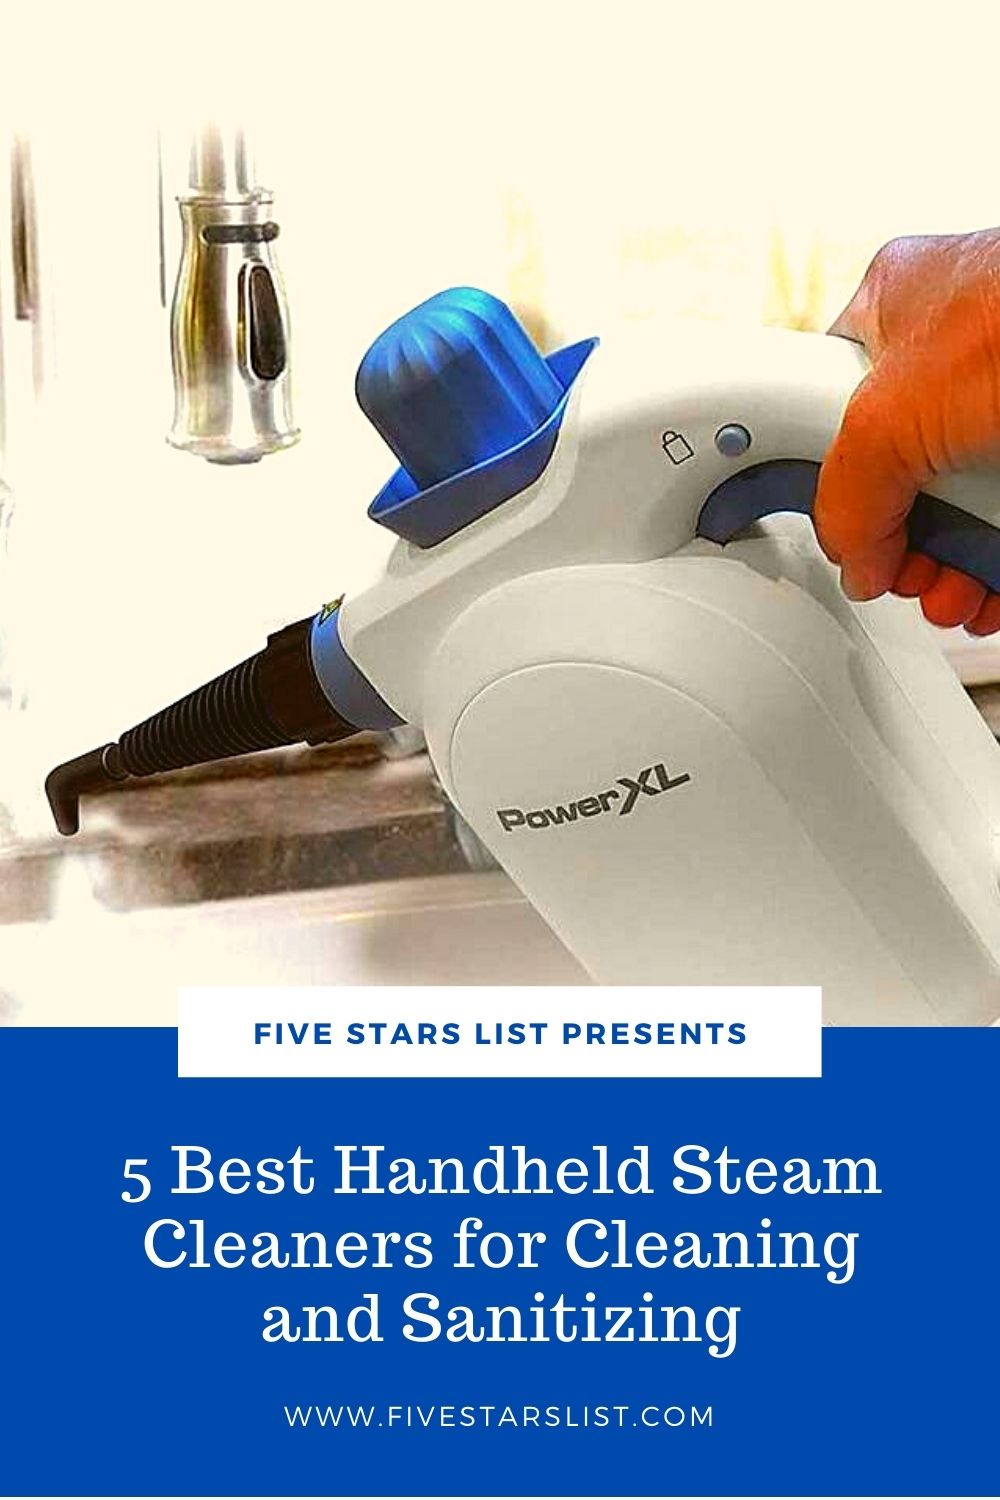 5 Best Handheld Steam Cleaners for Cleaning and Sanitizing